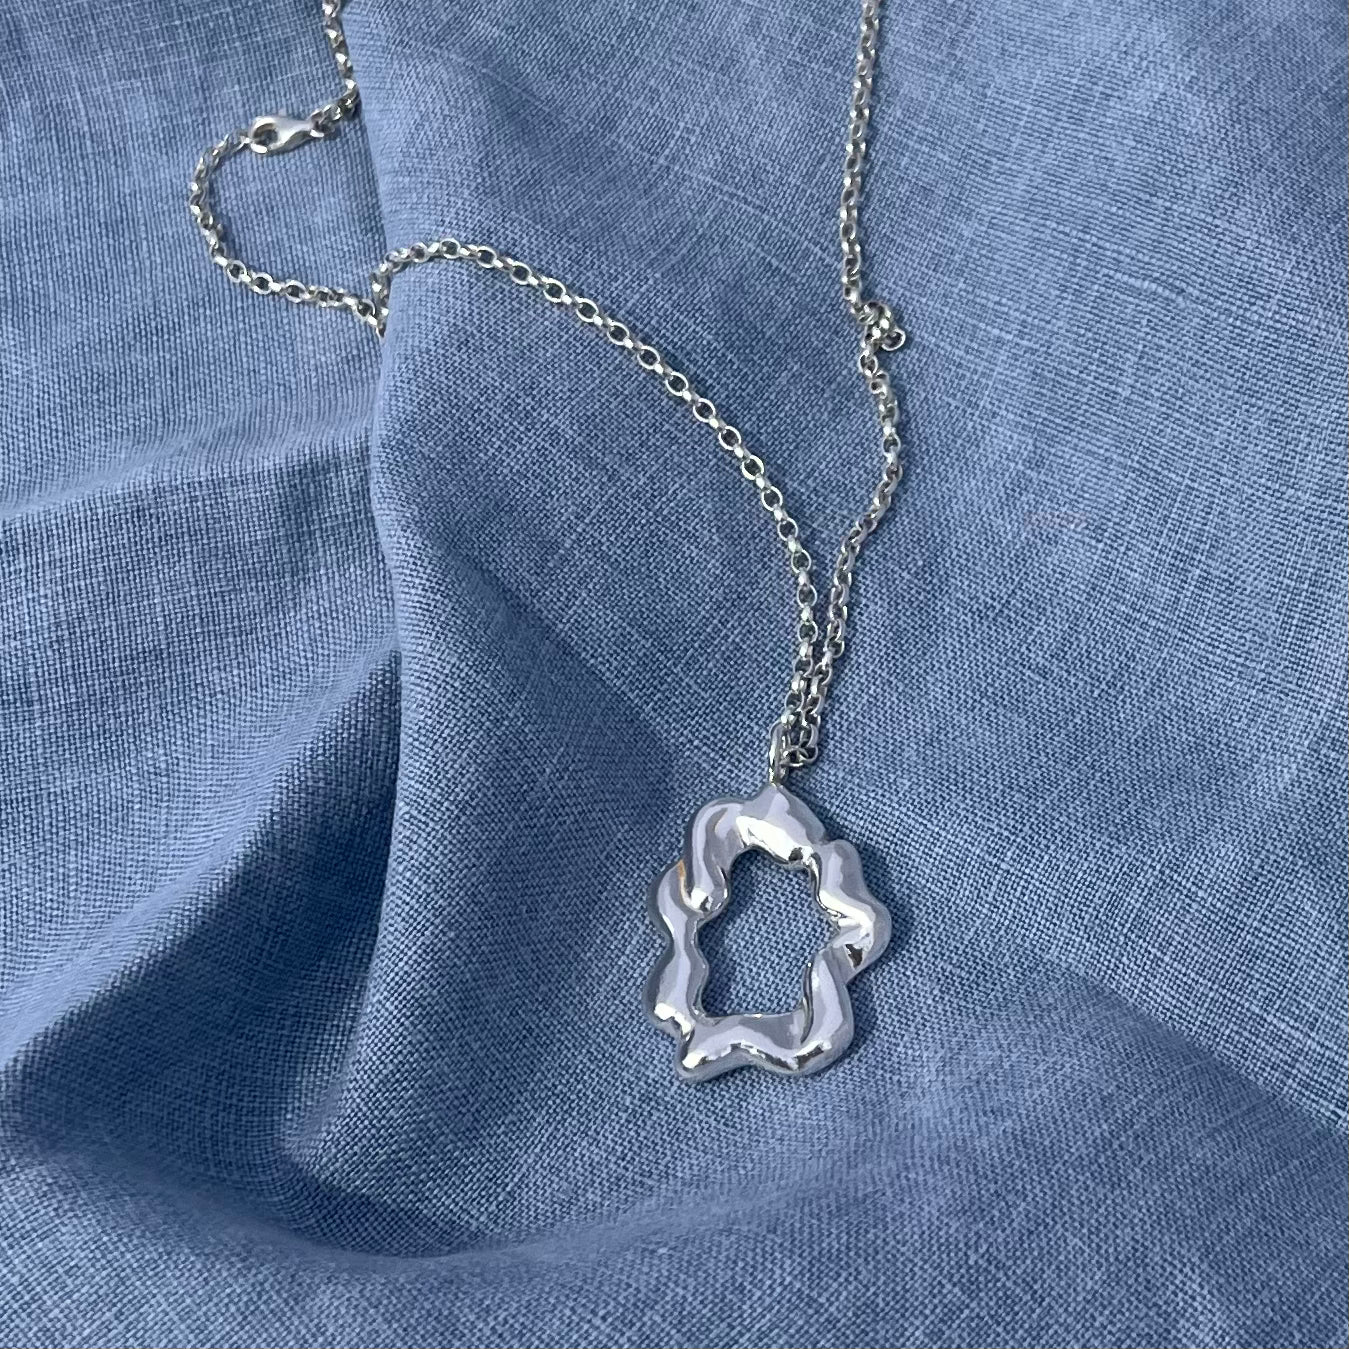 The 'Cloud pendant'. A sterling silver abstract shaped pendant on a silver belcher chain. The background is blue linen.